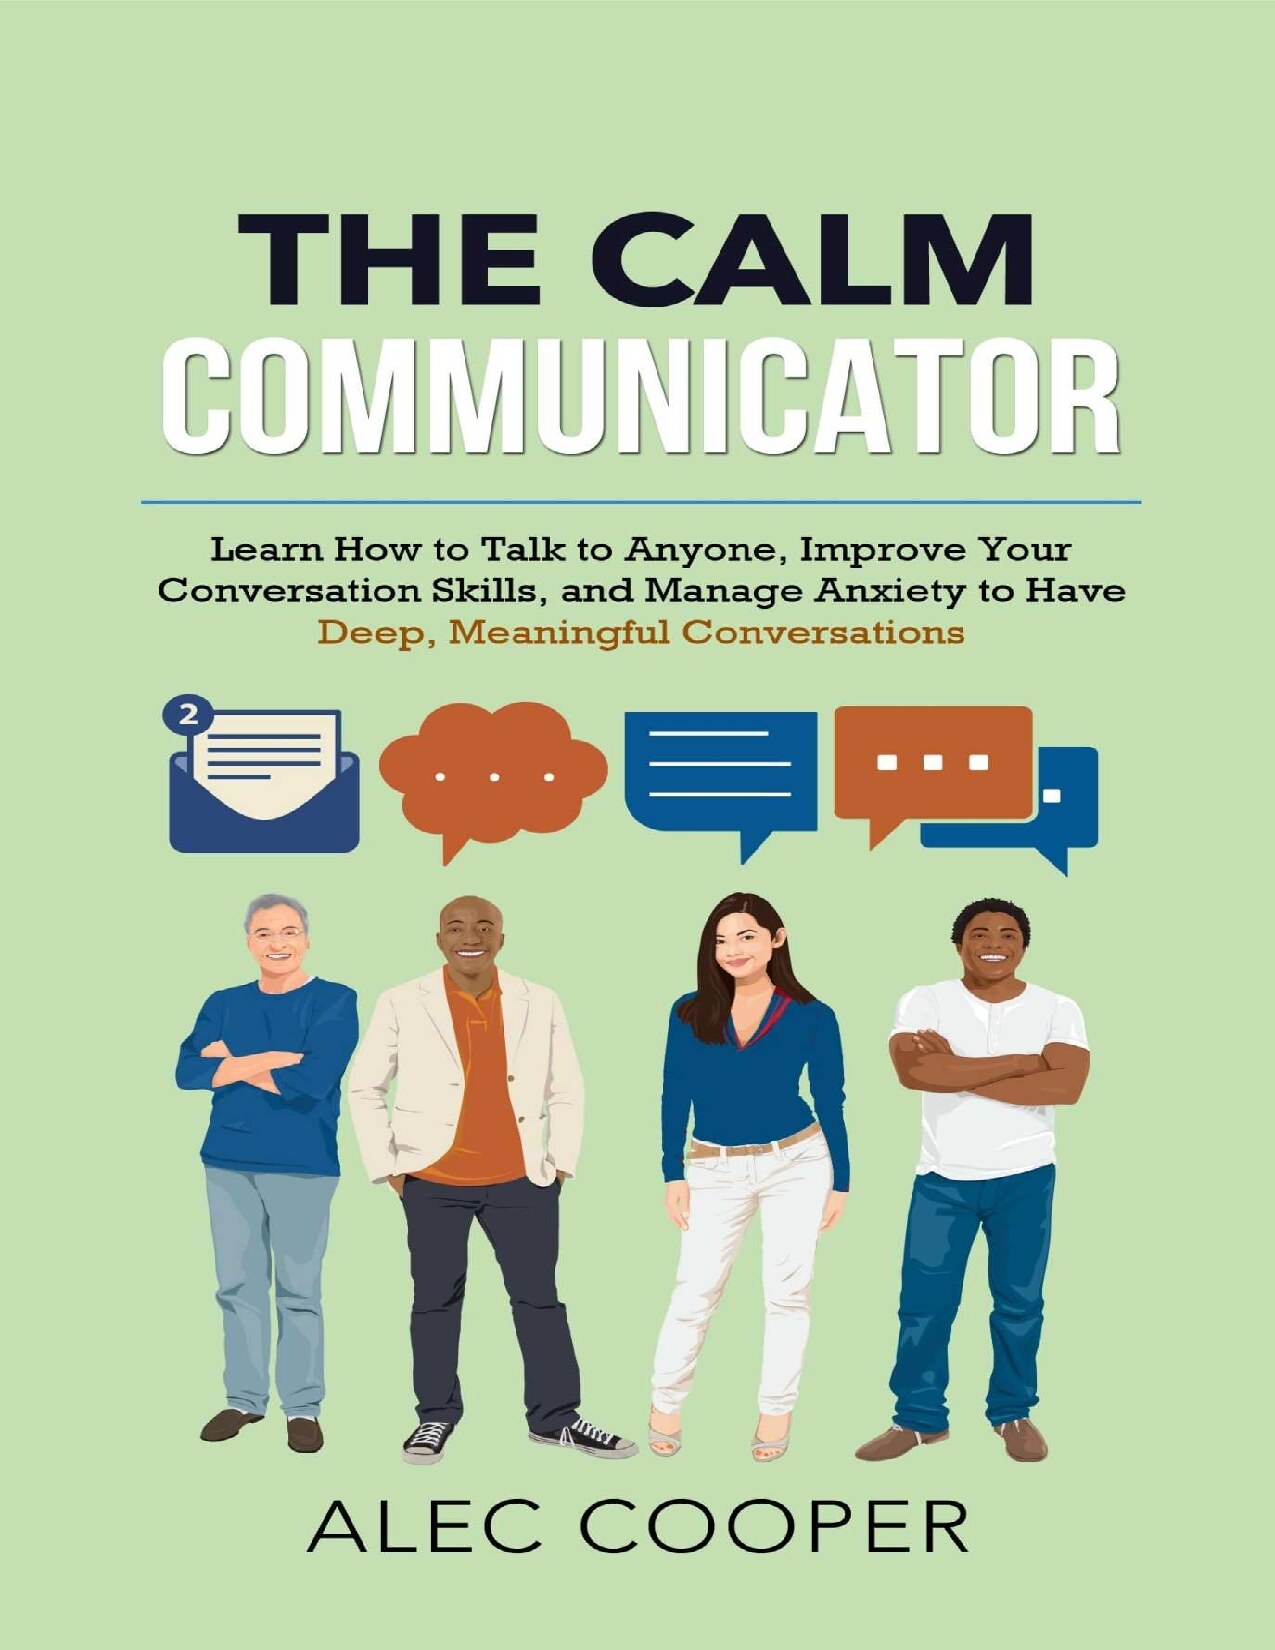 The Calm Communicator: Learn How to Talk to Anyone, Improve Your Conversation Skills, and Manage Anxiety to Have Deep, Meaningful Conversations